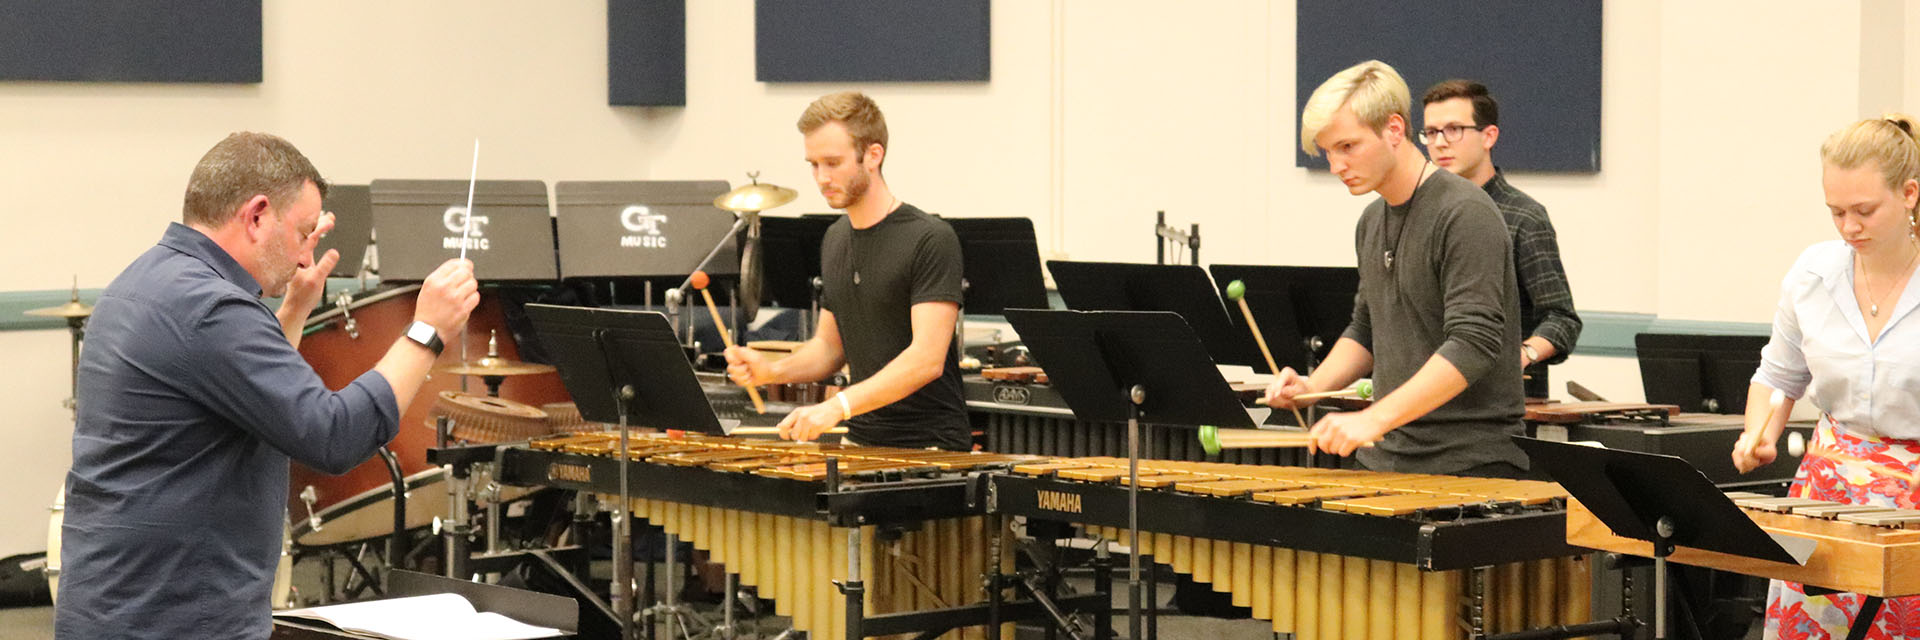 The Percussion Ensemble performs in concert.